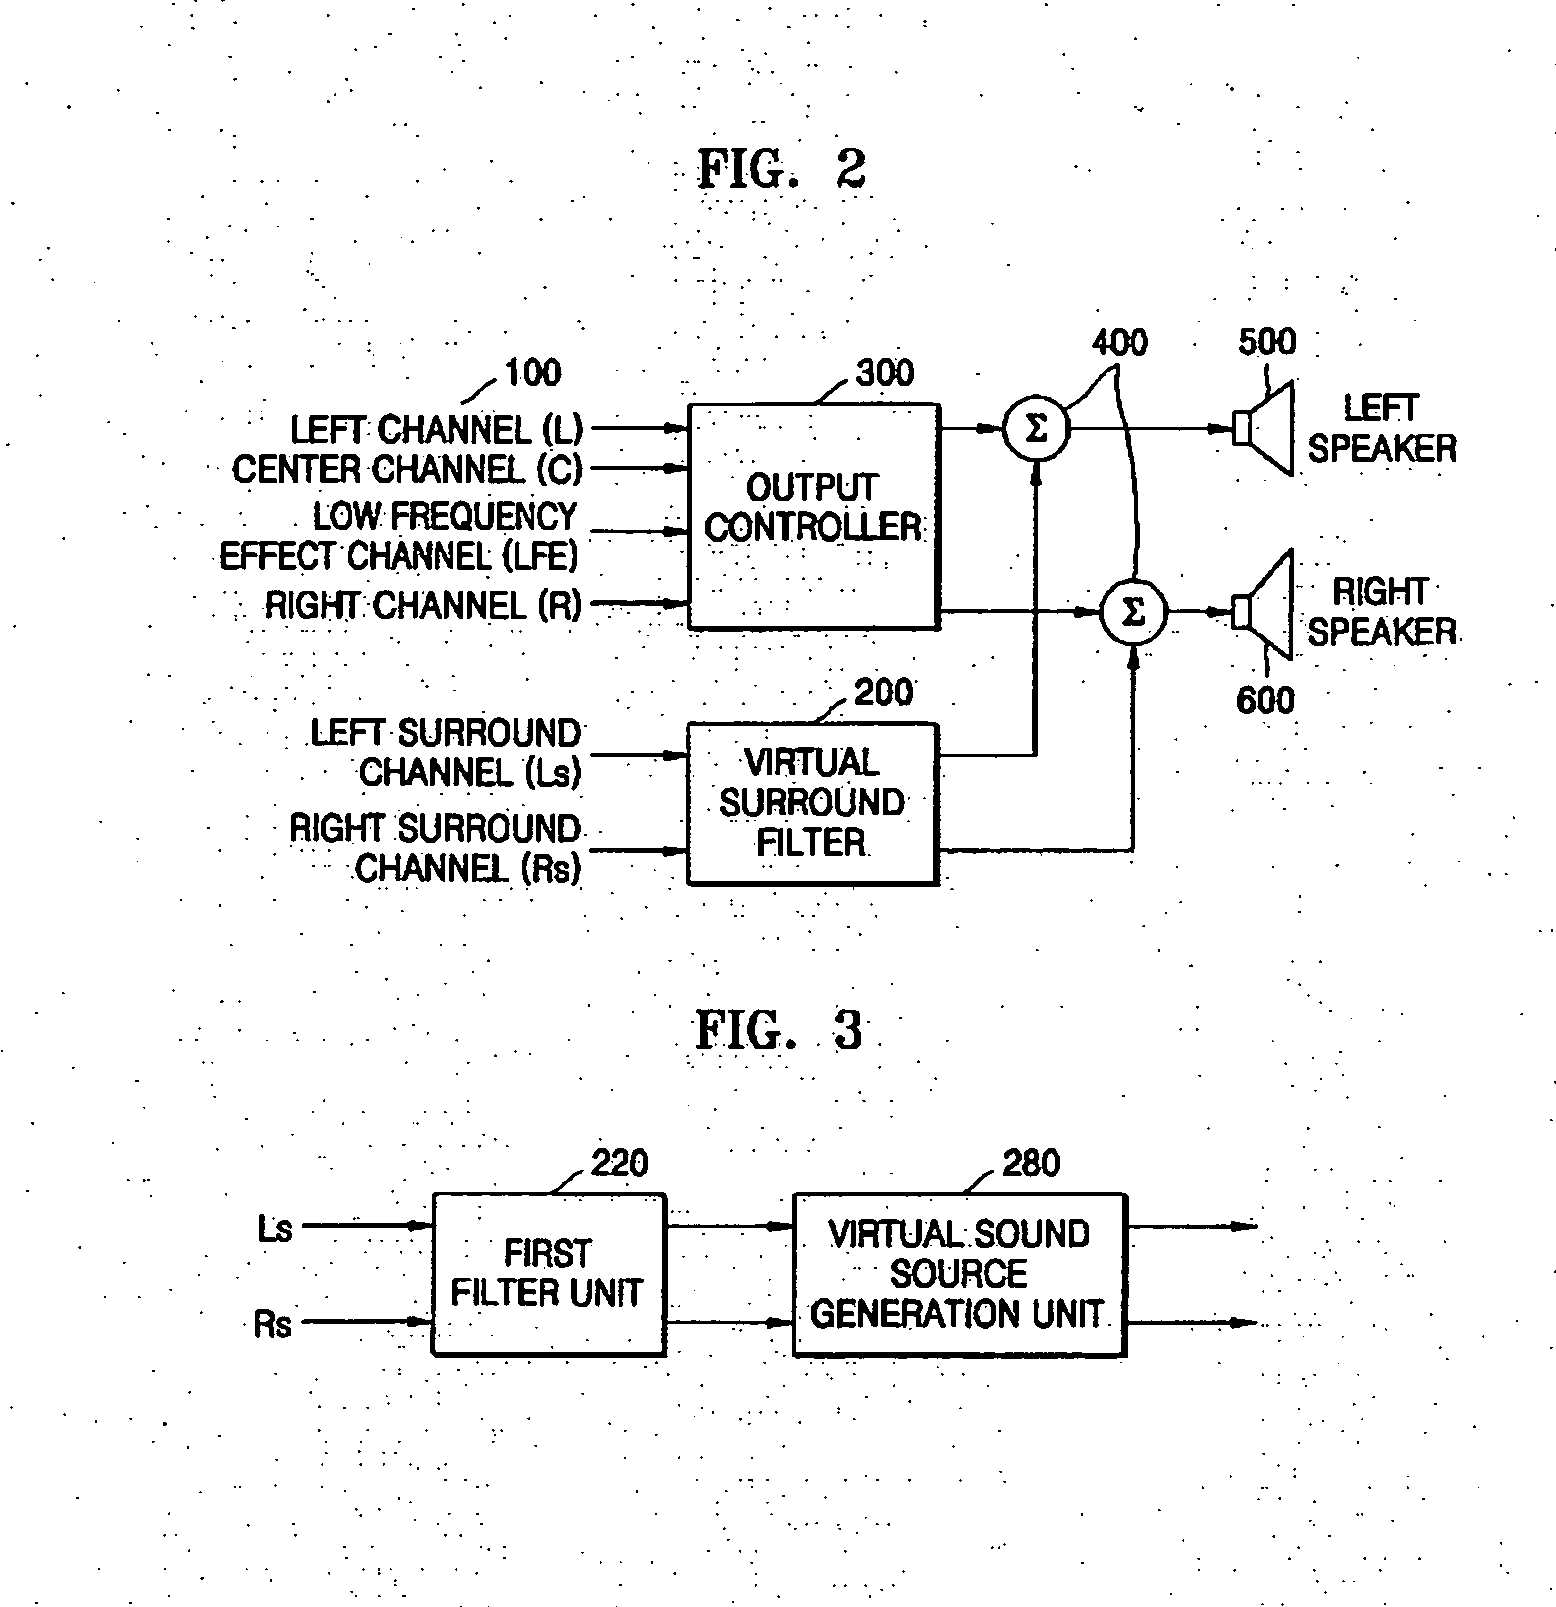 Apparatus and method of processing multi-channel audio input signals to produce at least two channel output signals therefrom, and computer readable medium containing executable code to perform the method